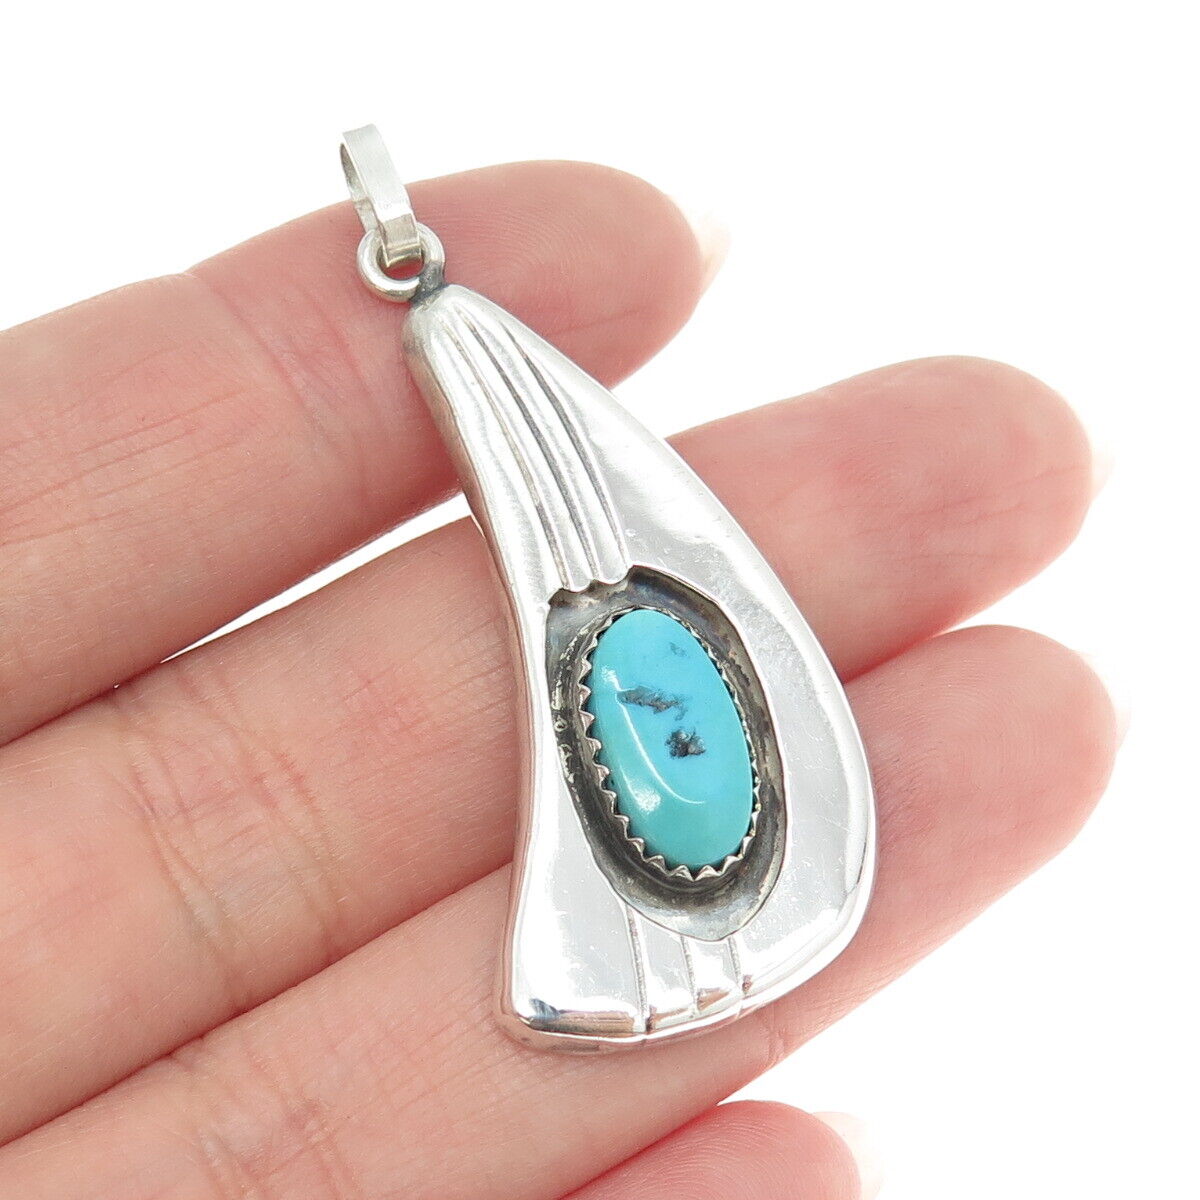 MICHAEL R. ROGERS PAIUTE Old Pawn 925 Sterling Silver Morenci Turquoise Pendant